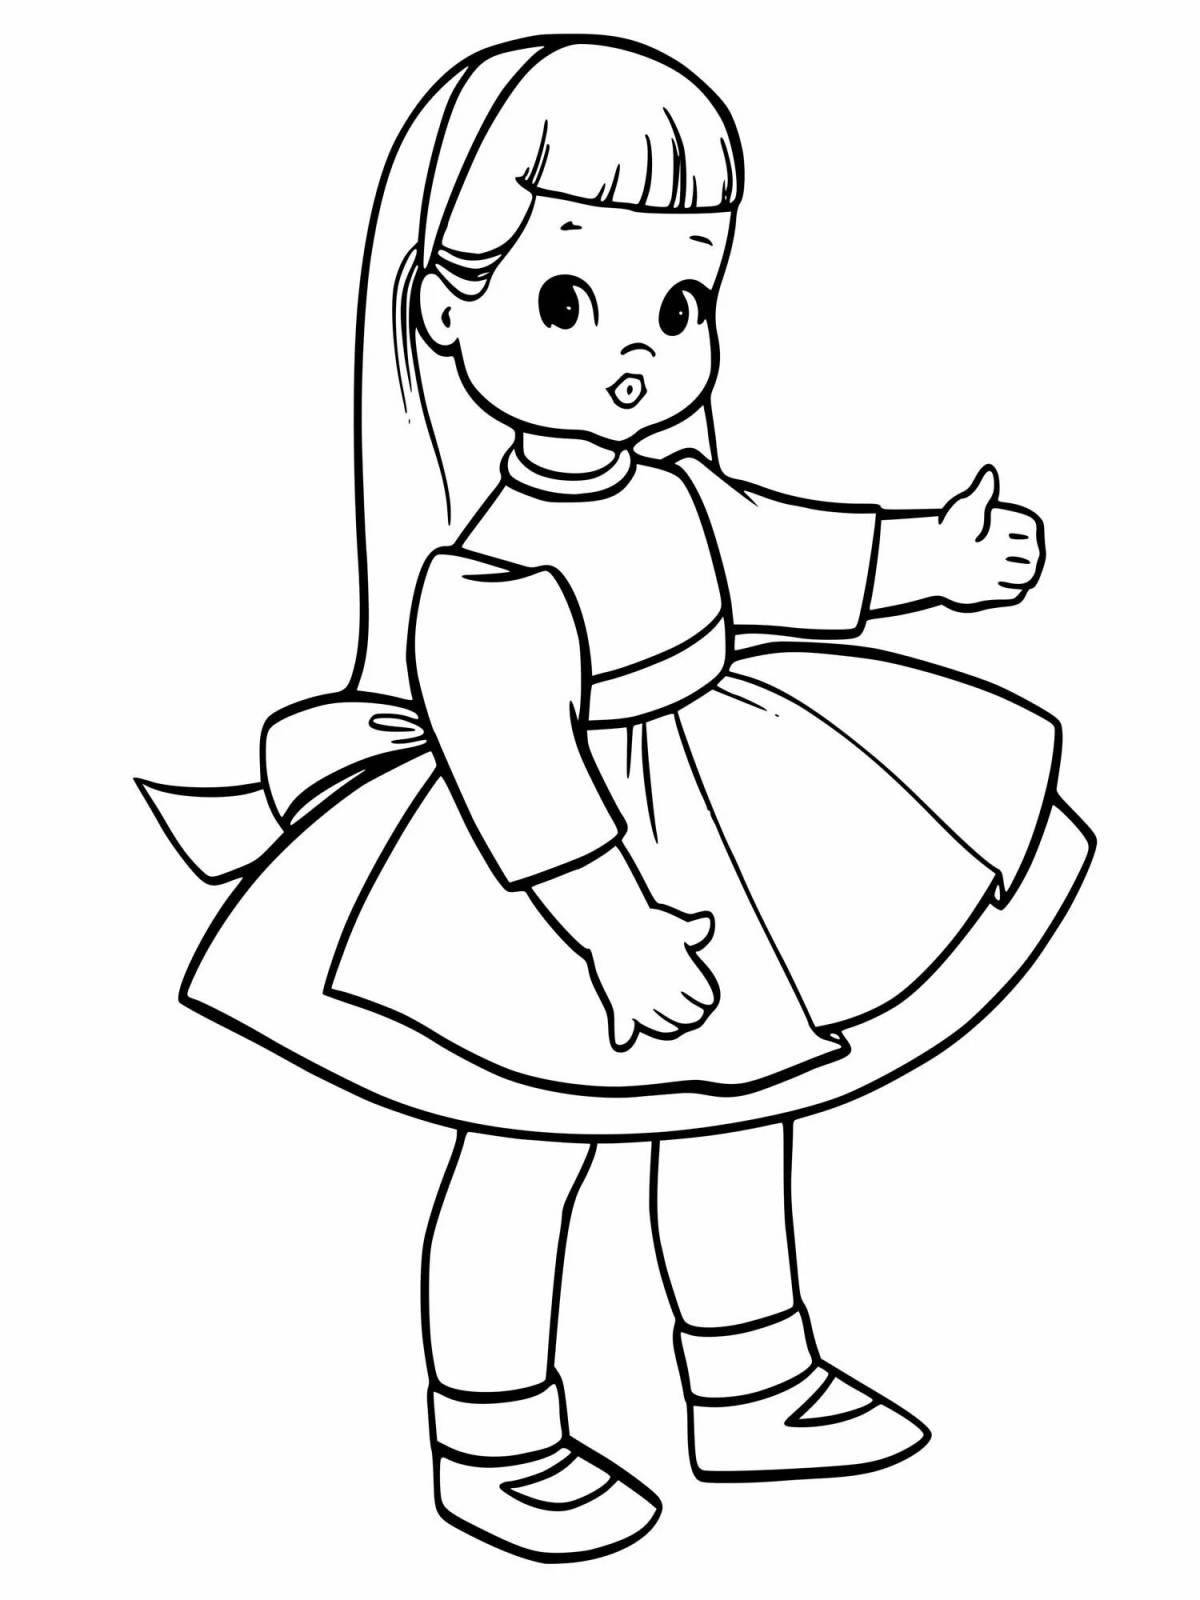 Cute doll coloring book for 6-7 year olds